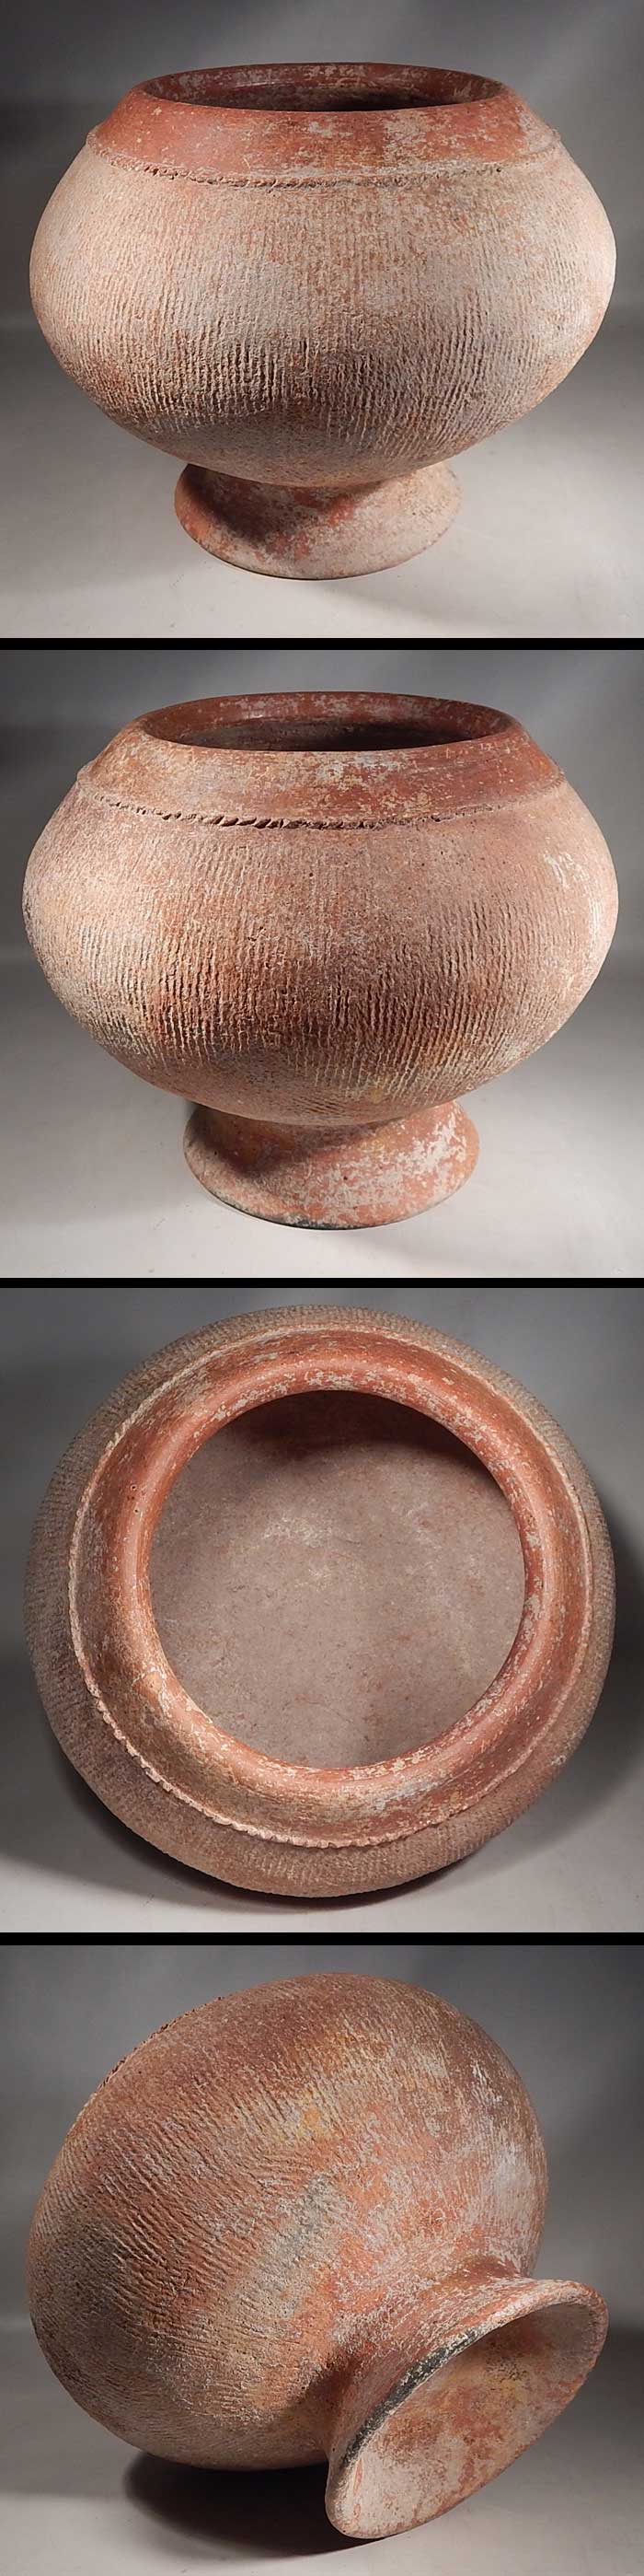 Ancient Thailand Ban Chaing Pottery Incised Footed Bowl Vessel